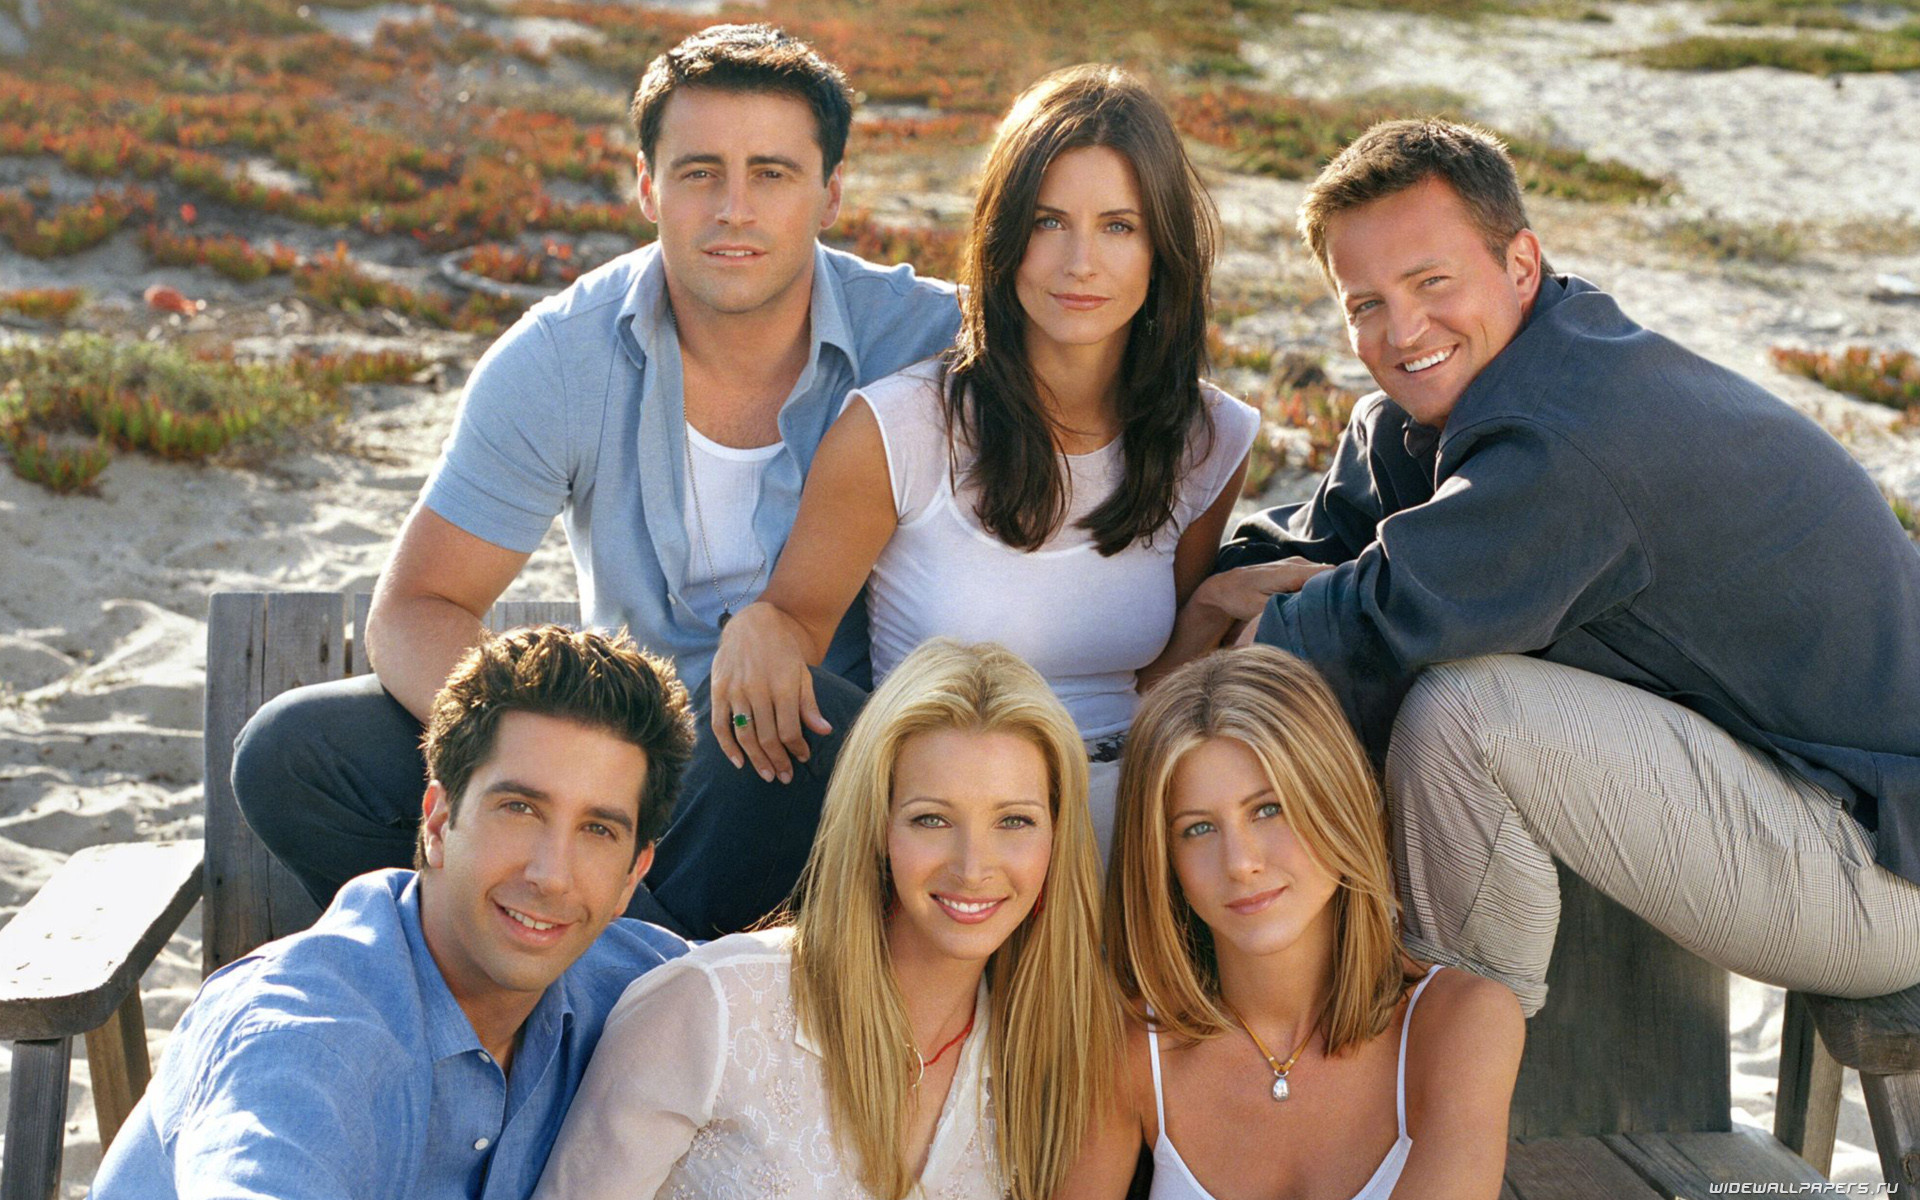 Friends TV Show Wallpapers (80+ images)